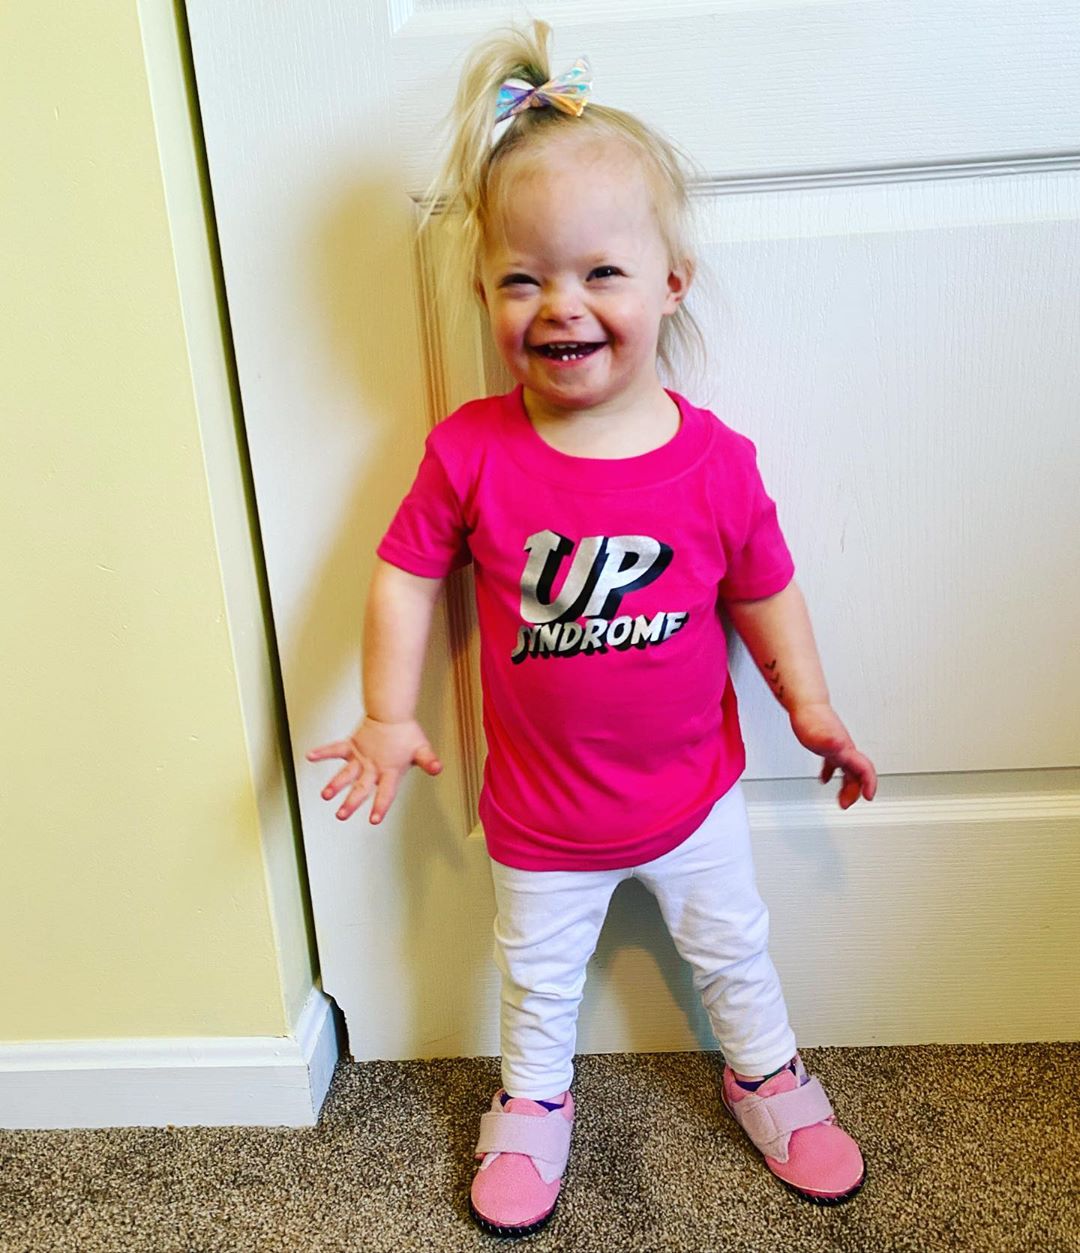 Alice wearing a pink t-shirt that says "Up Syndrome."